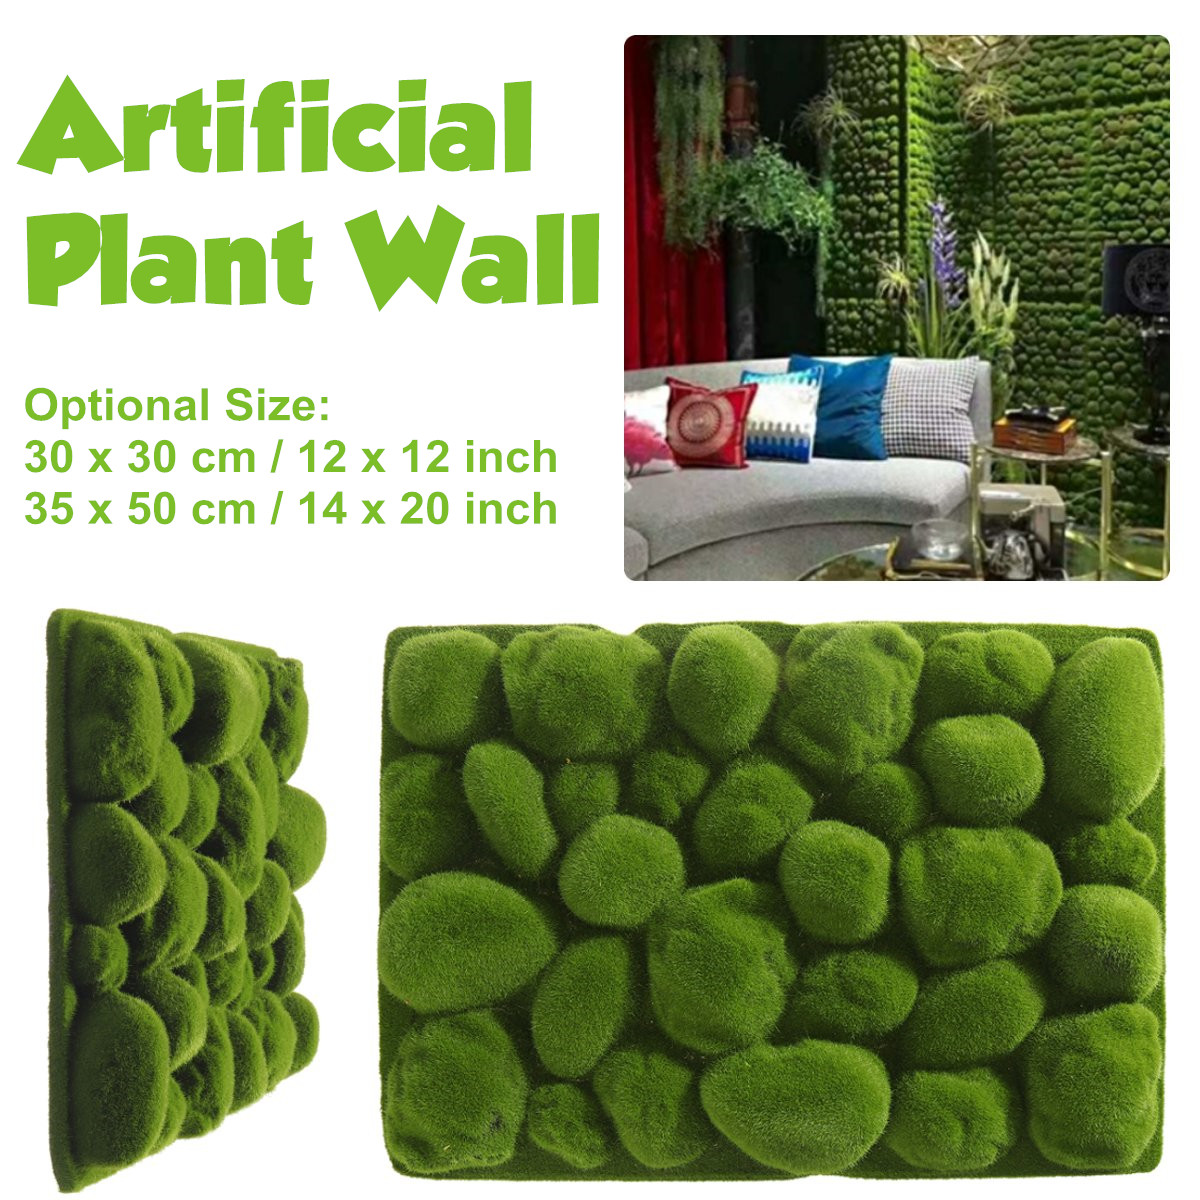 Artificial-Topiary-Hedges-Panels-Plastic-Faux-Shrubs-Fence-Mat-Greenery-Wall-Backdrop-Decor-Garden-P-1955507-2